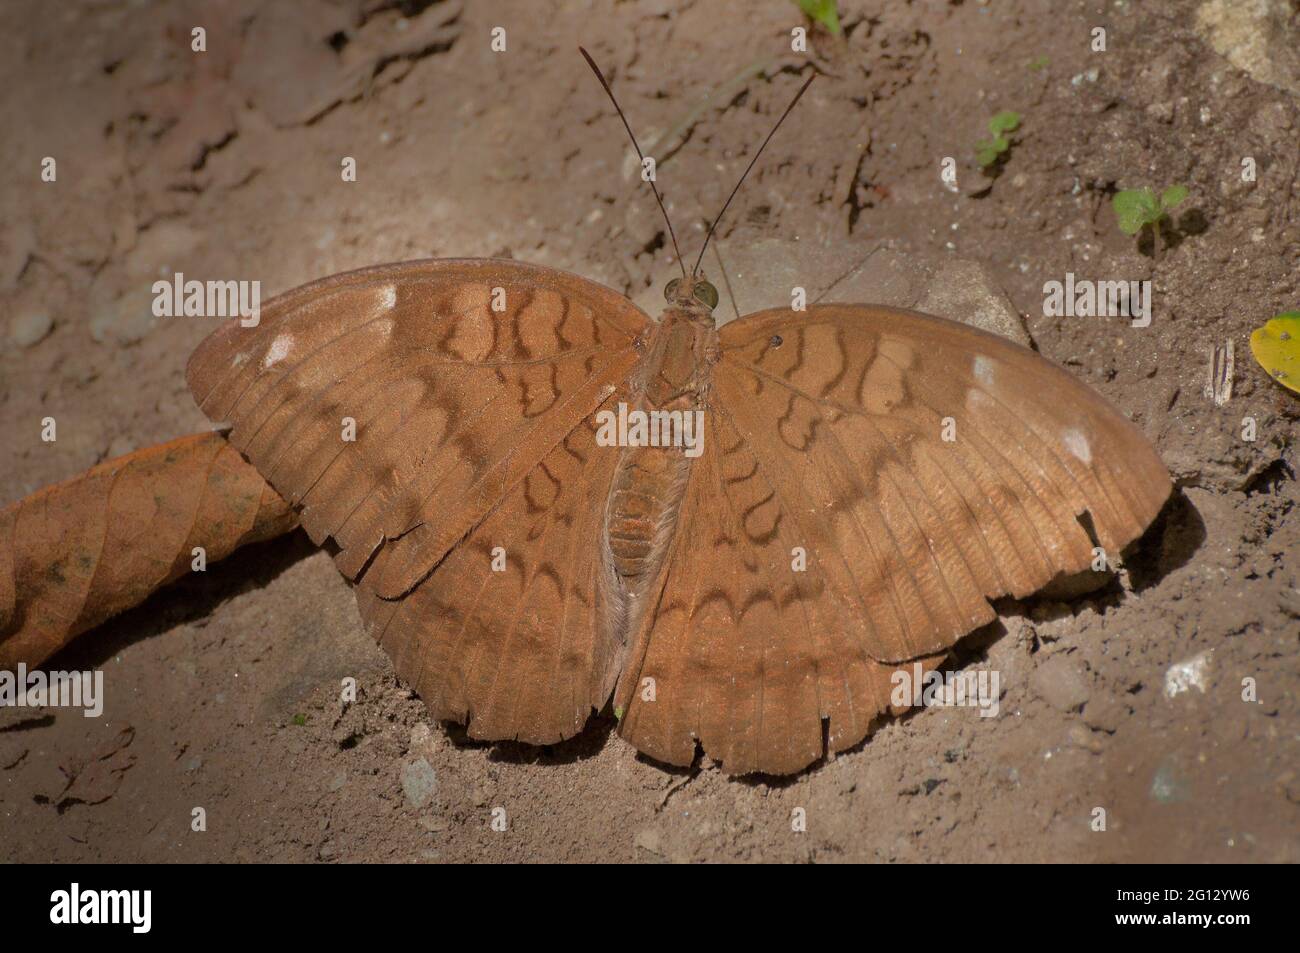 Common Baron butterfly (Euthalia aconthea) mud puddling , ie, sucking up fluid from moist area. Image shot at Sikkim, India. Stock Photo